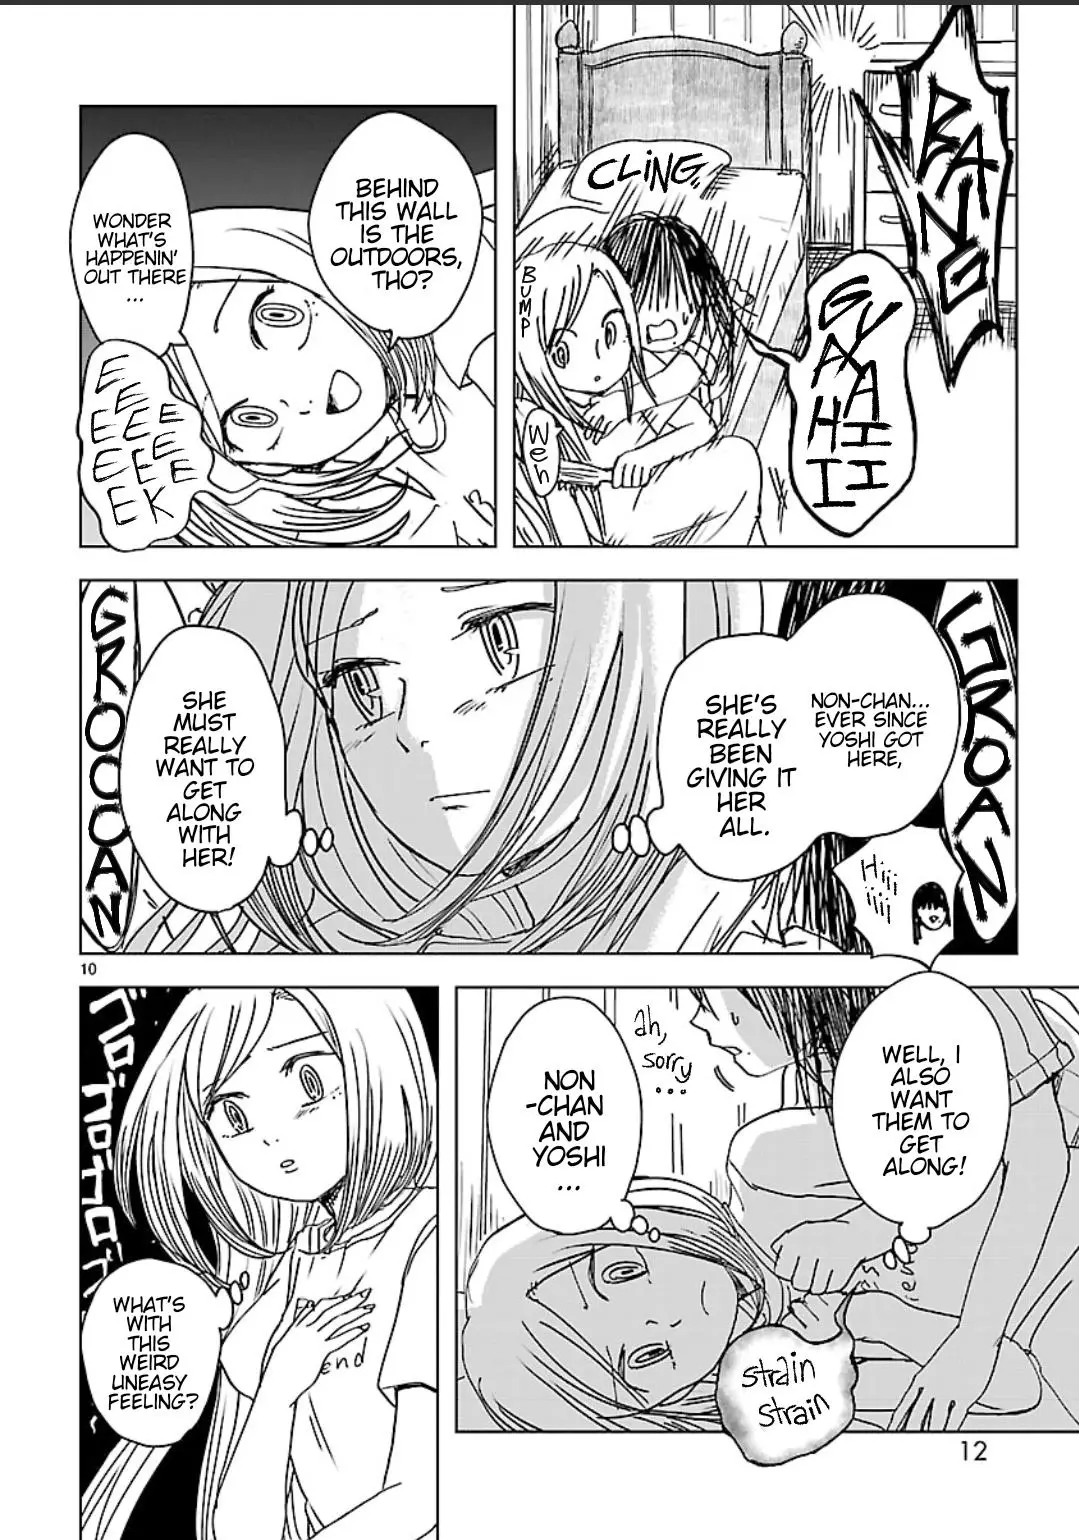 Non-Chan To Akari - 10 page 10-f4f7ce2c